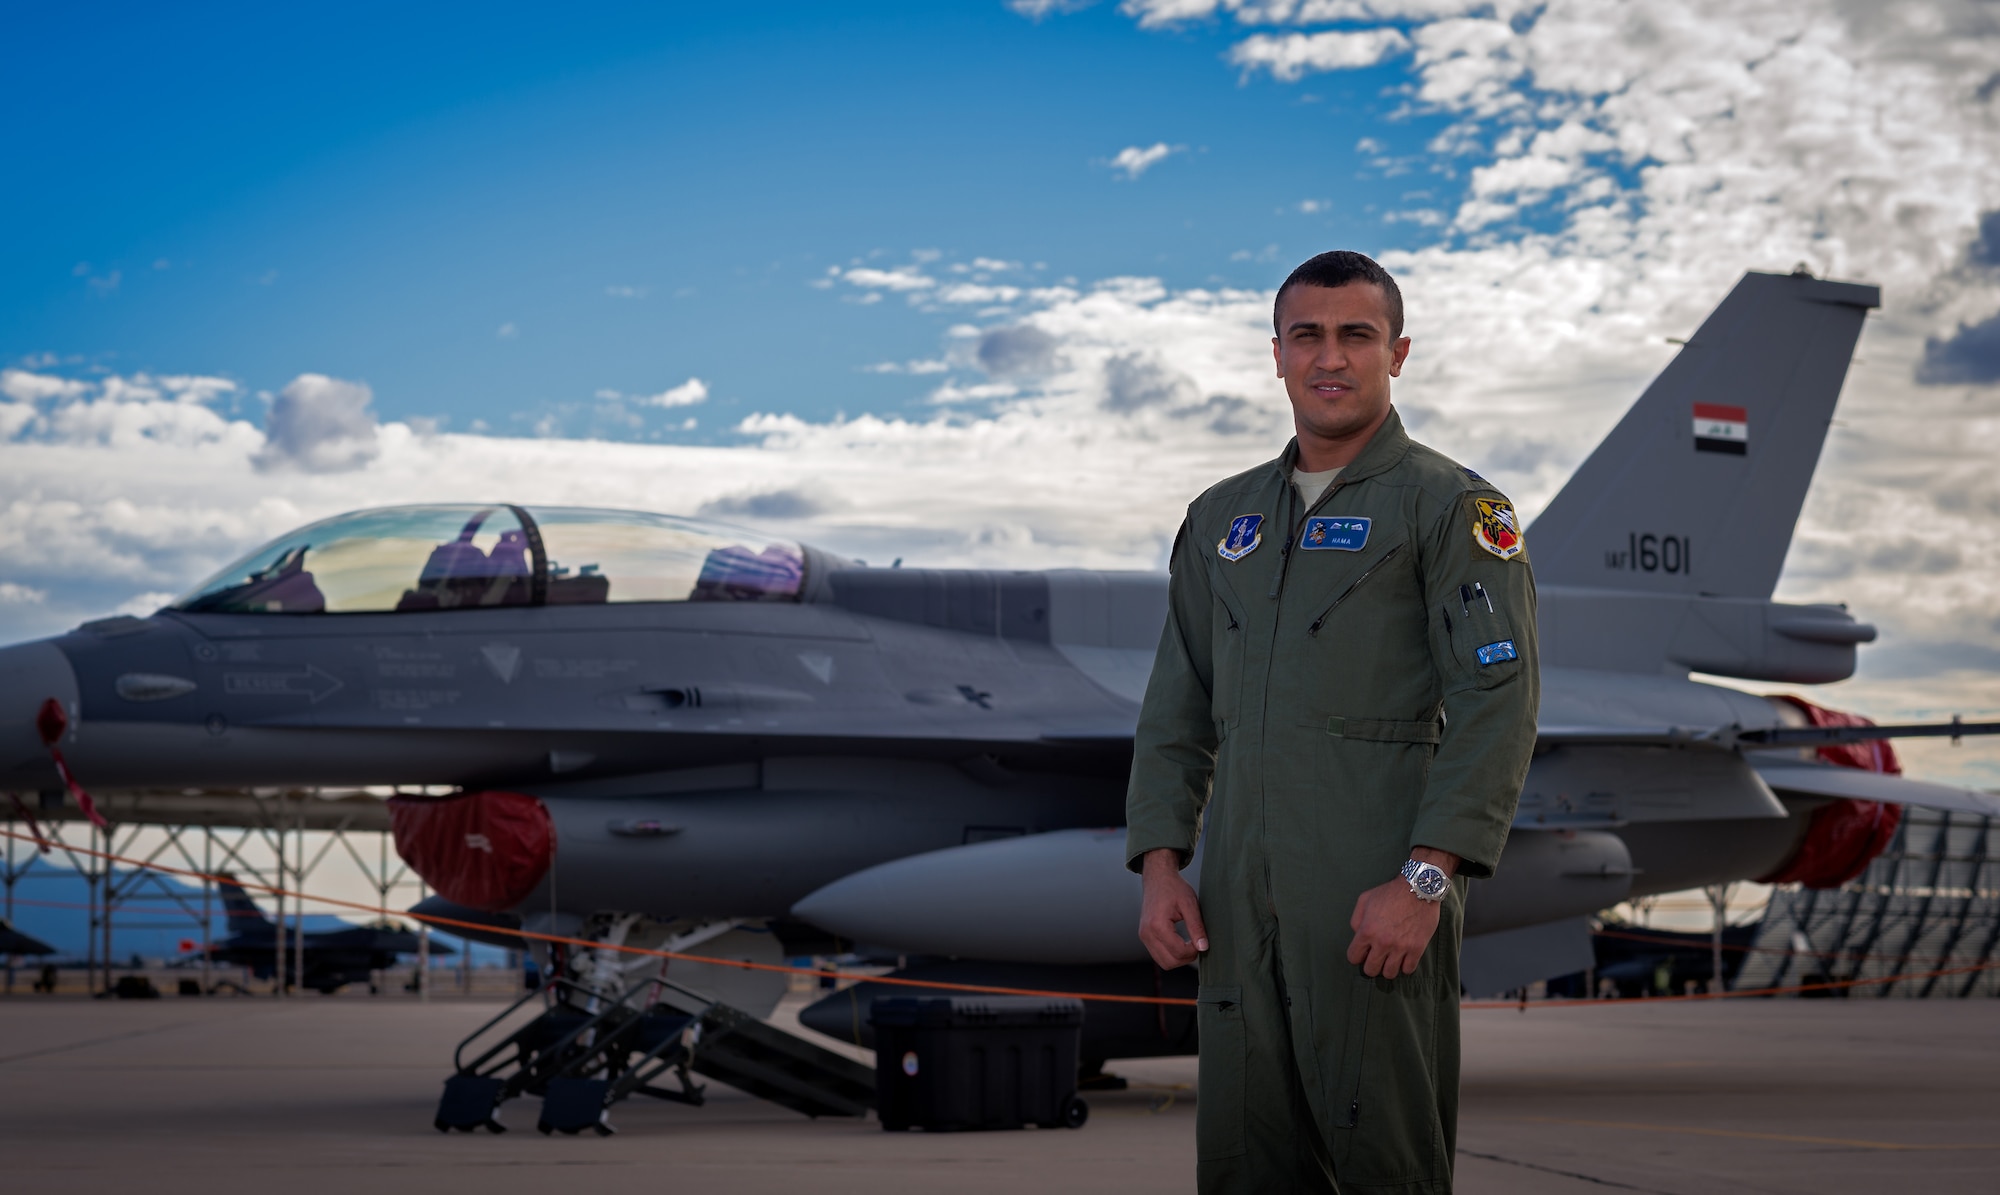 Iraqi air force captain Hama stands in front of one of the IAF F-16 Fighting Falcons Dec. 16, 2014 at Tucson International Airport, Ariz. Hama helped deliver one of the IAF's new F-16Ds to their training location. (U.S. Air Force photo/Senior Airman Jordan Castelan)